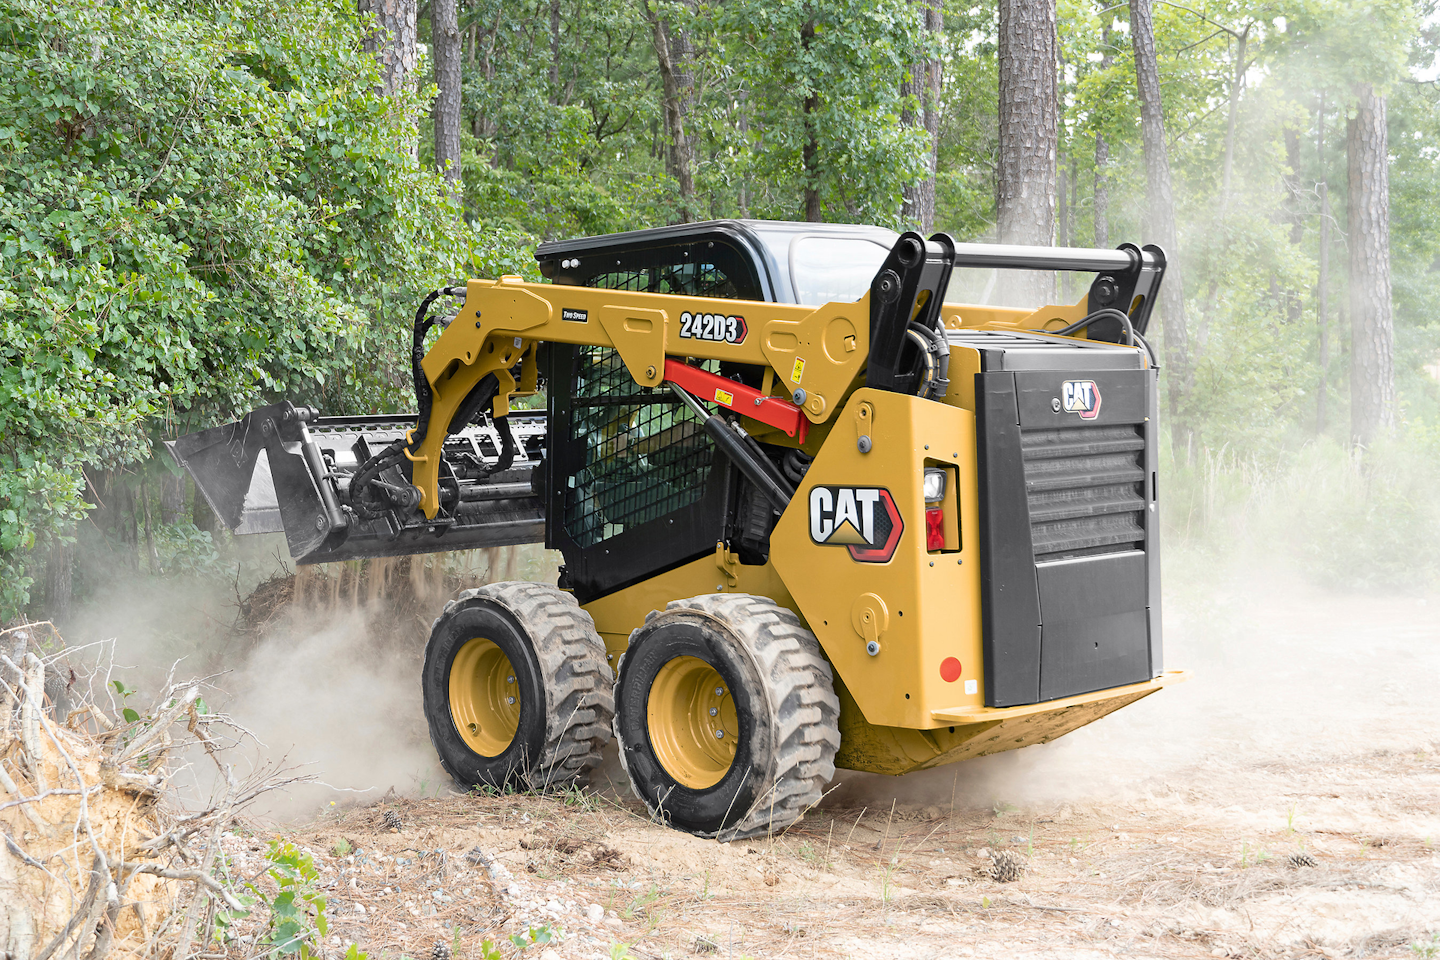 CATERPILLAR ROLLS OUT NEW CAT® D3 SERIES SKID STEER AND COMPACT TRACK